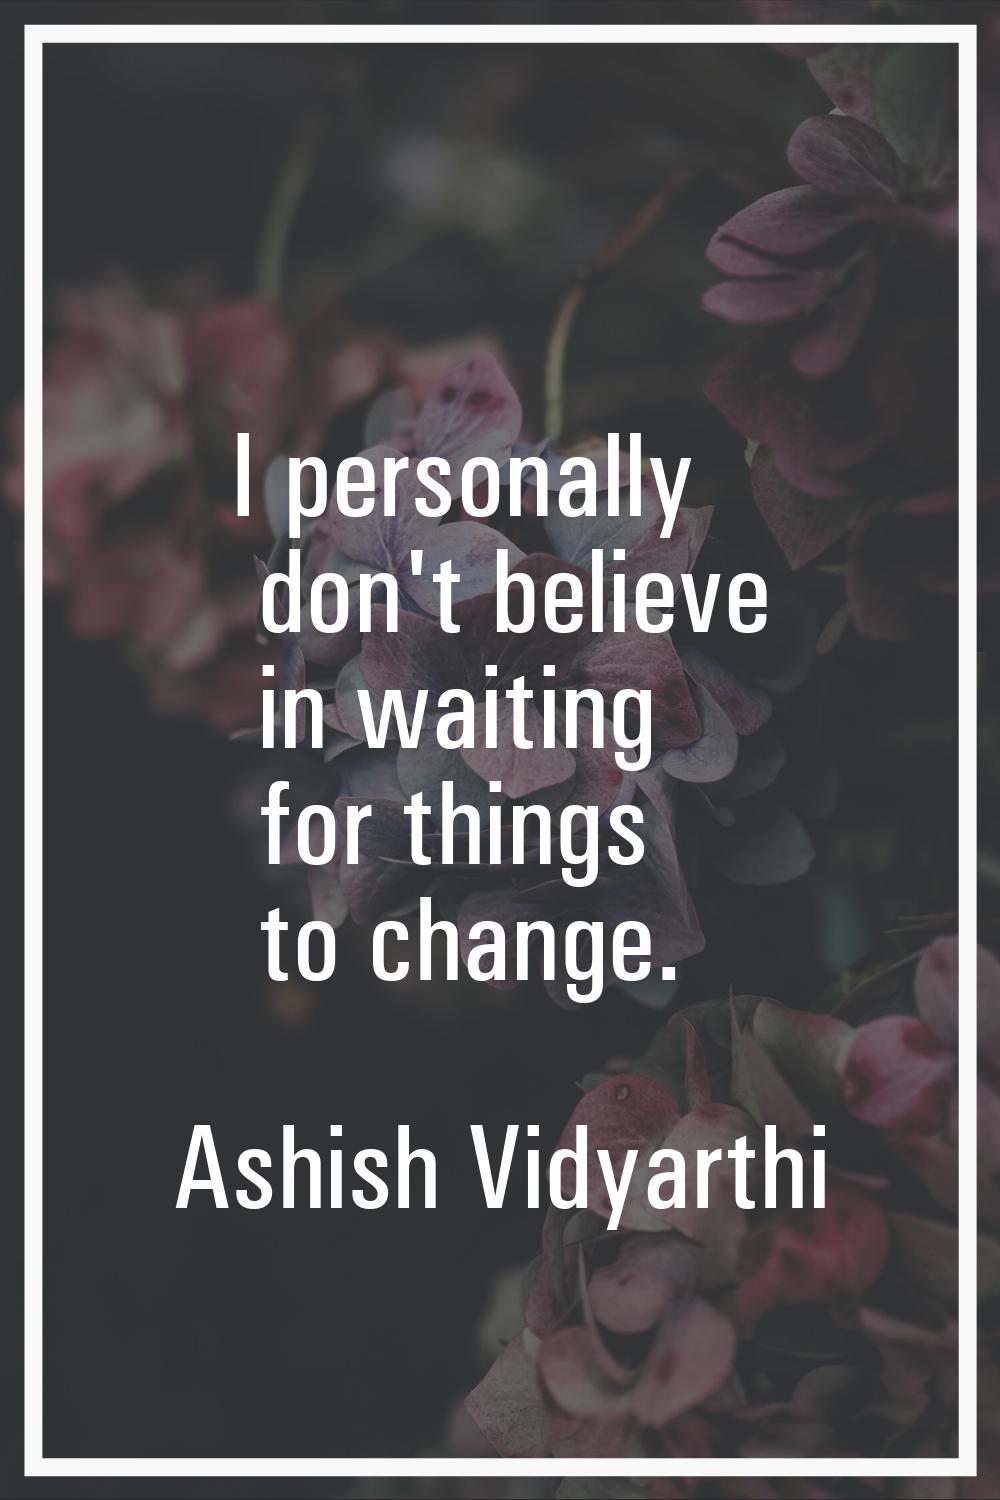 I personally don't believe in waiting for things to change.